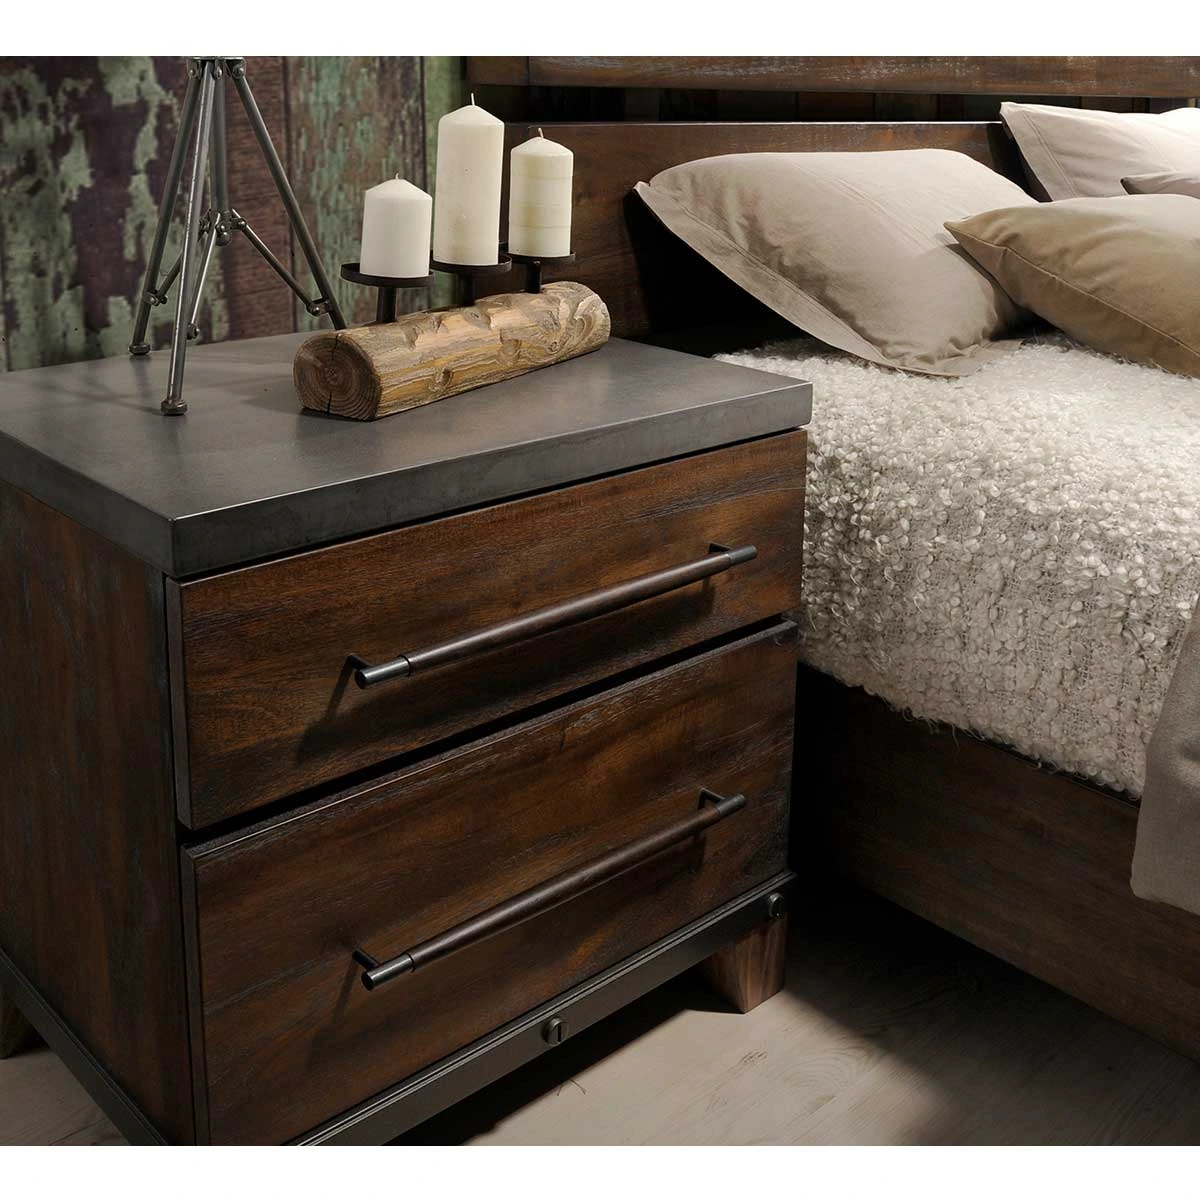 The Austin Group Furniture Forge collection wooden nightstand 